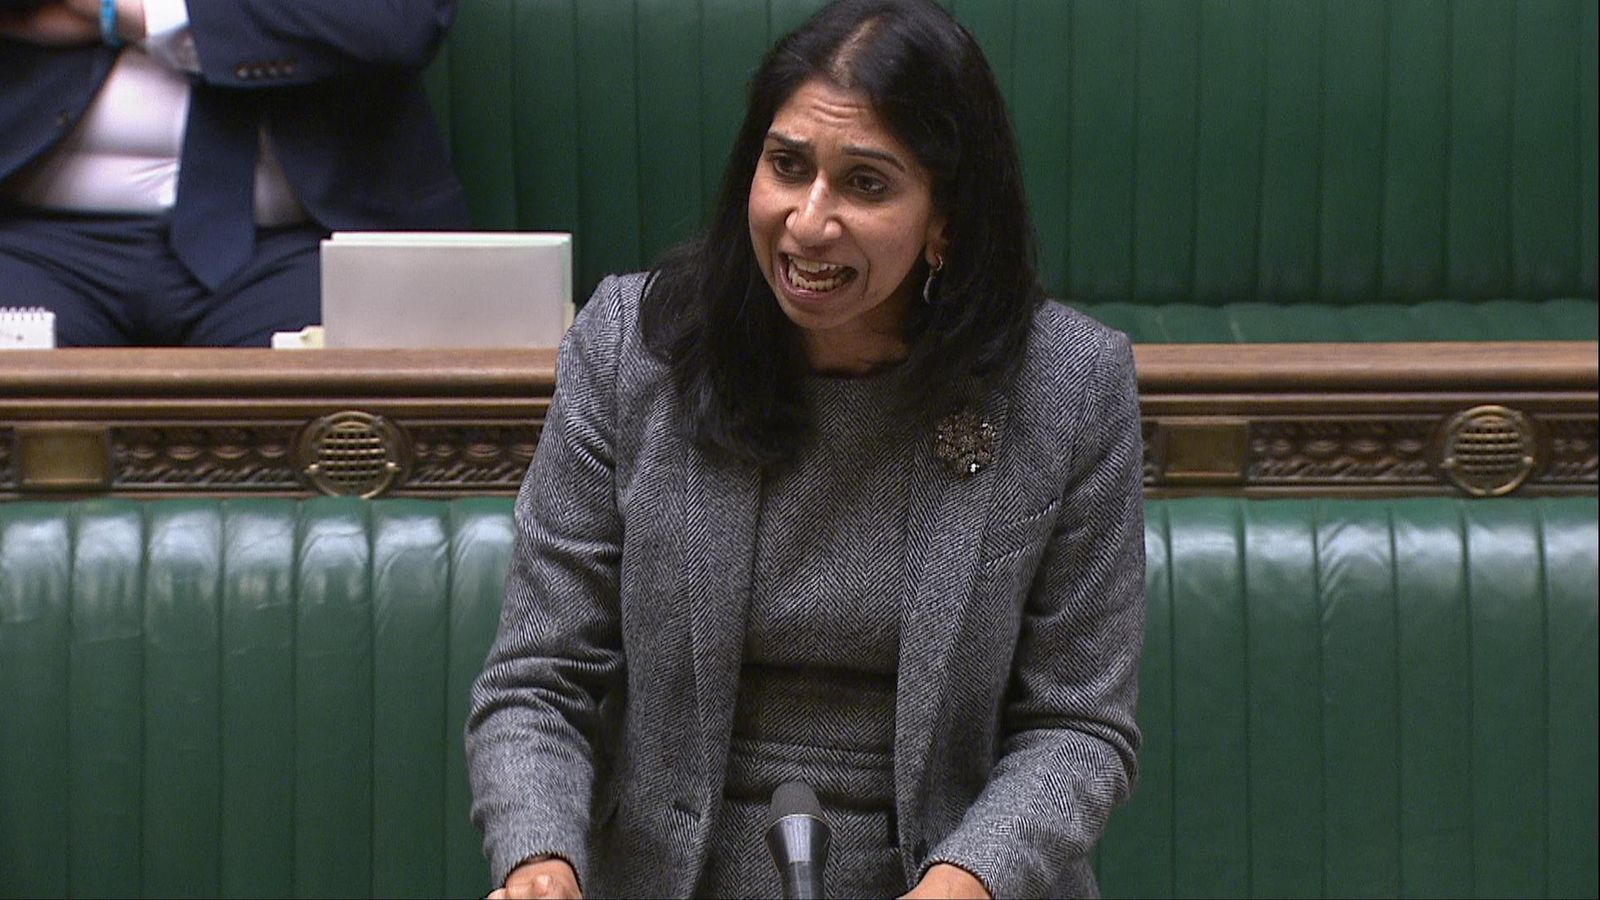 Suella Braverman resigns as home secretary after sharing secure information from private email - and takes aim at Liz Truss in departure